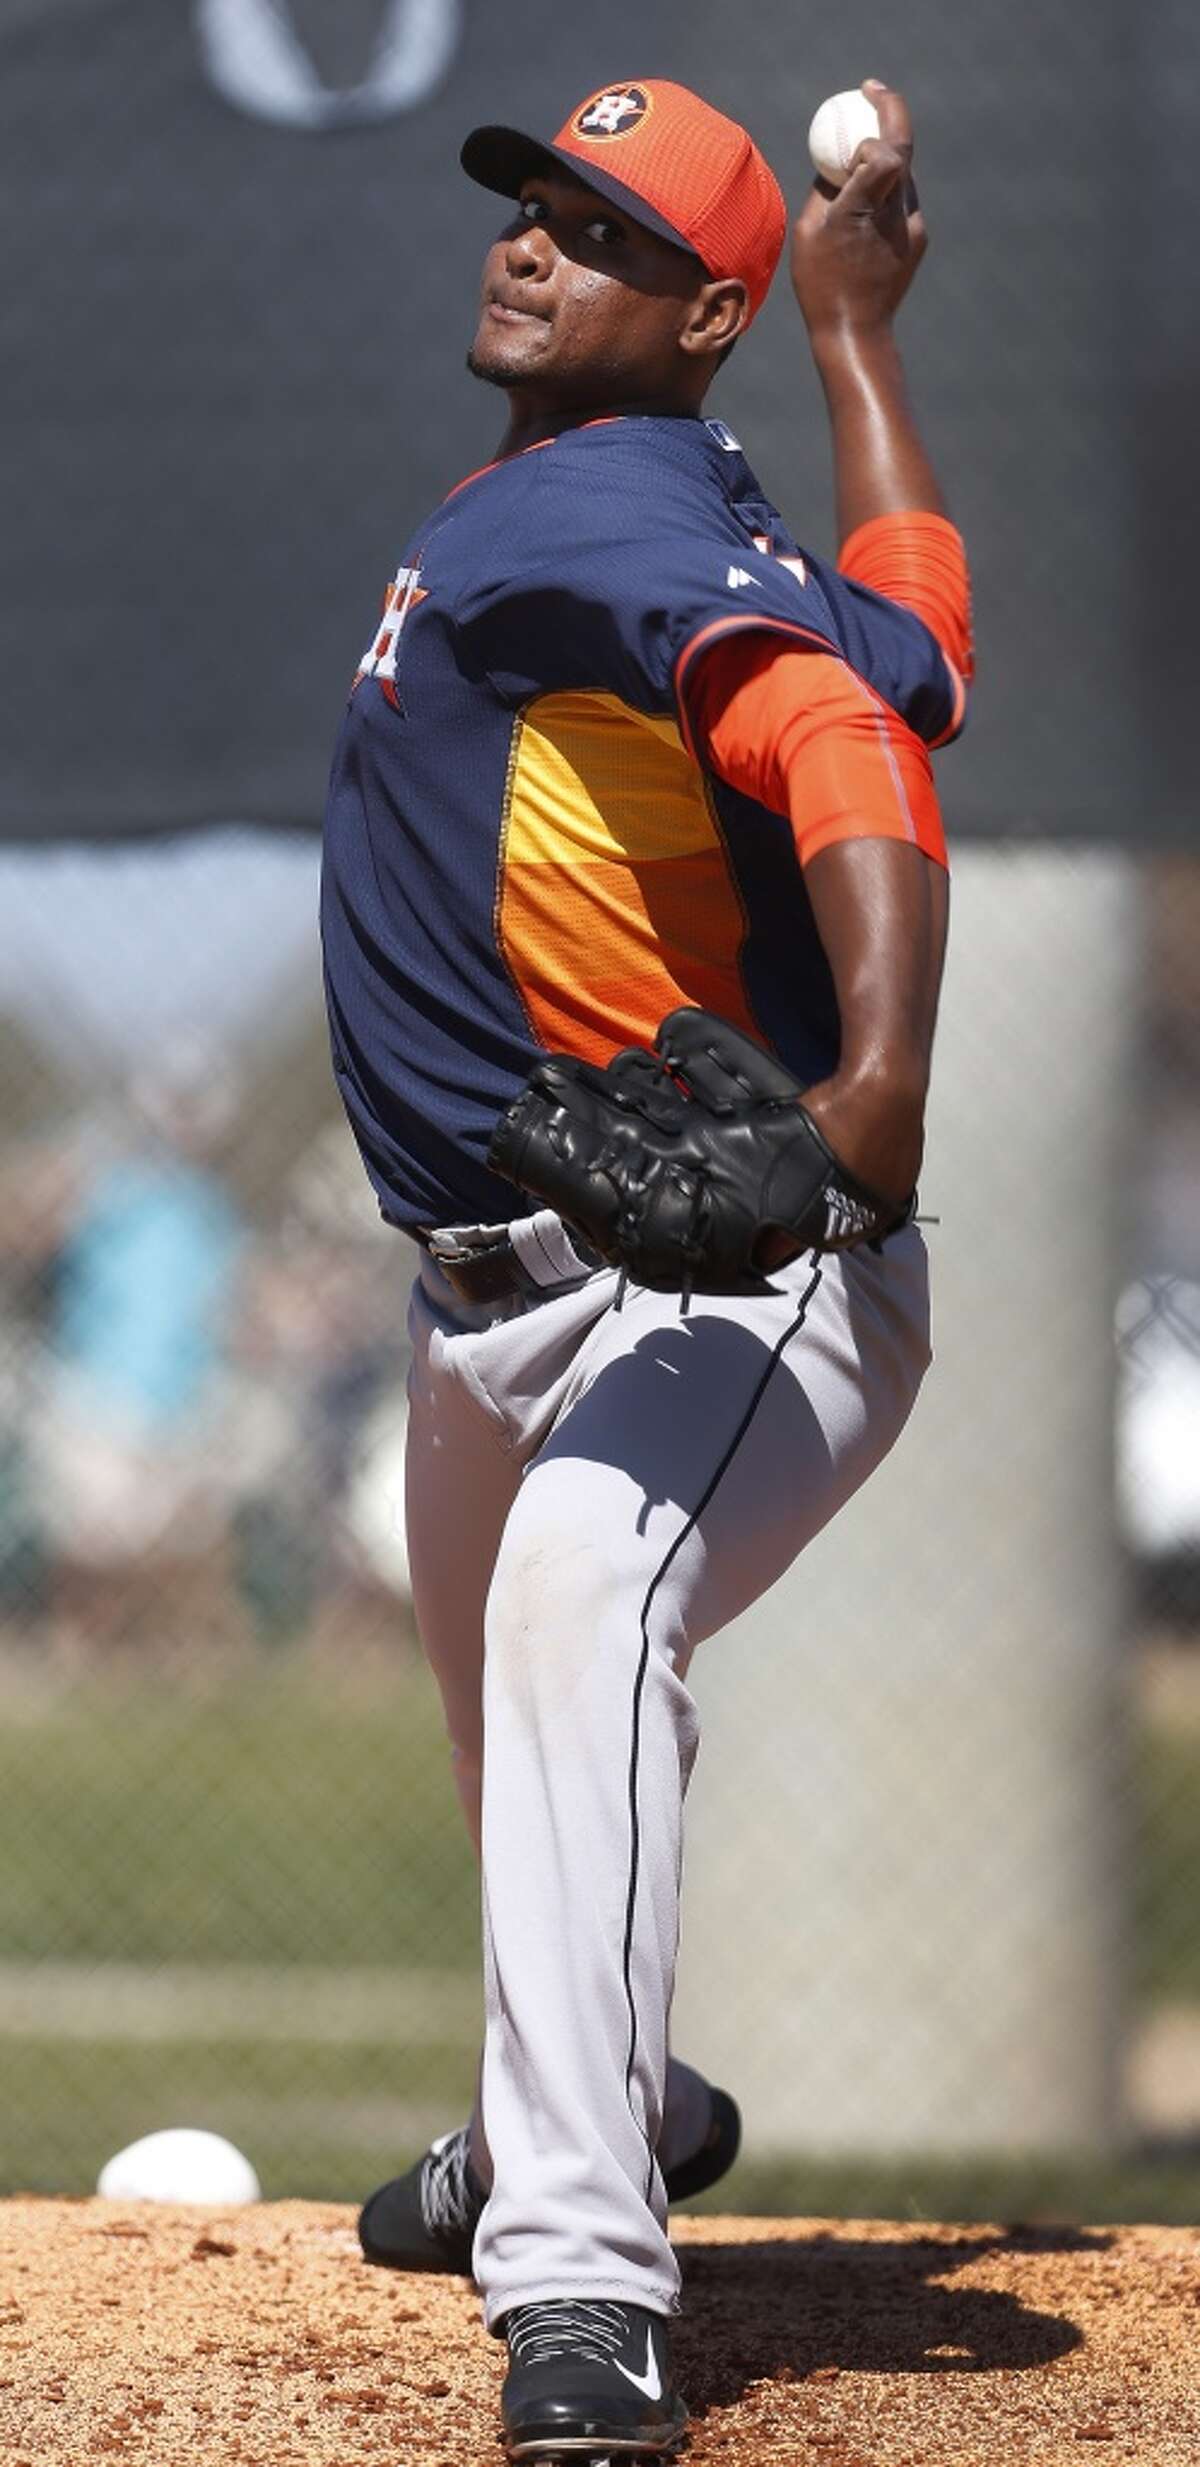 Houston Astros starting pitcher Michael Feliz (68) pitches during spring training workouts for pitchers and catchers at their Osceola County training facility, Sunday, Feb. 22, 2015, in Kissimmee. ( Karen Warren / Houston Chronicle )